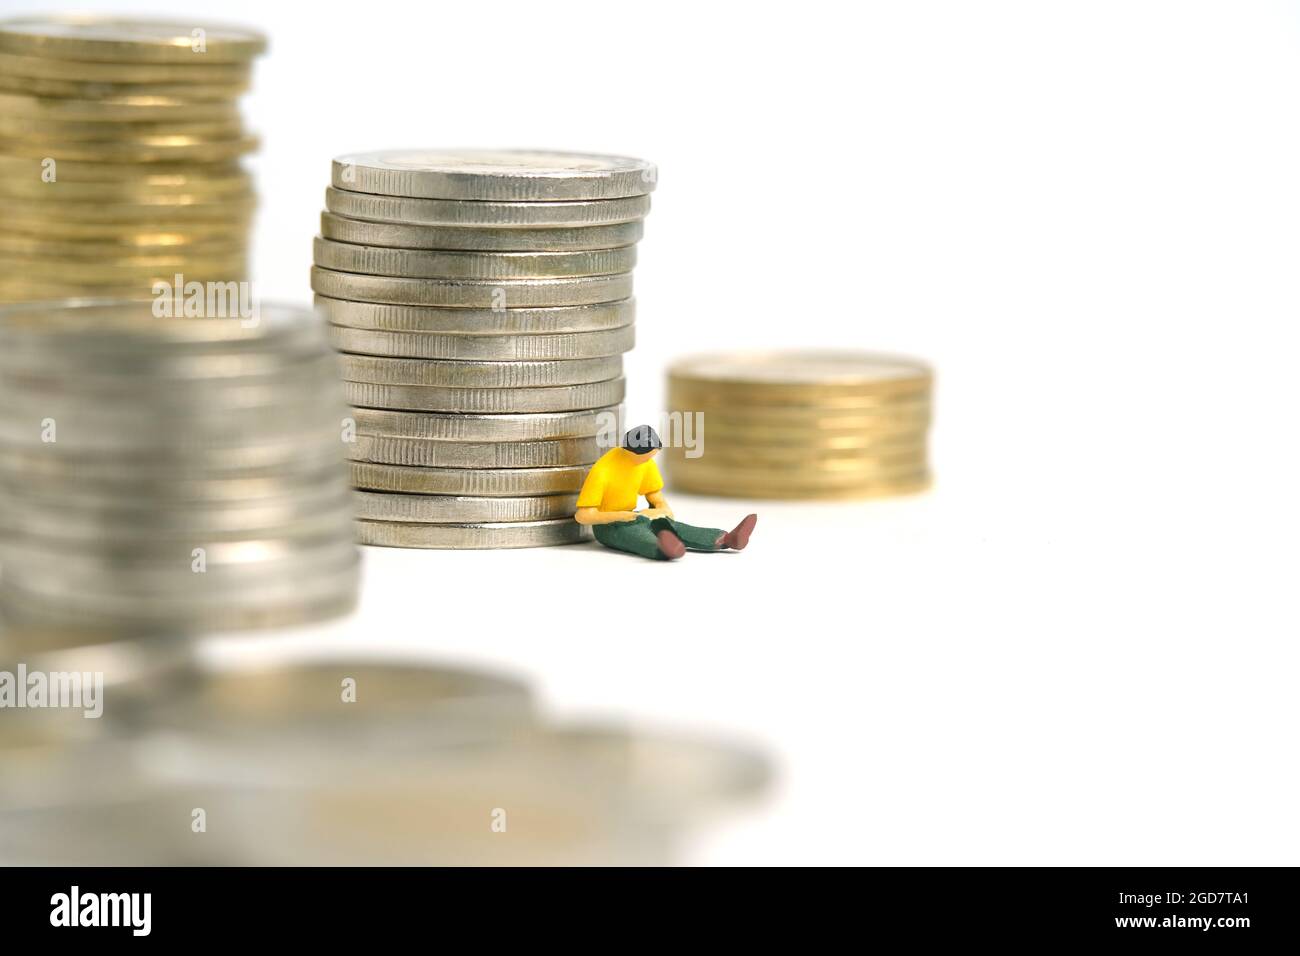 Miniature people toy figure photography. A men student sitting in front of money coin stack, isolated on white background. Image photo Stock Photo